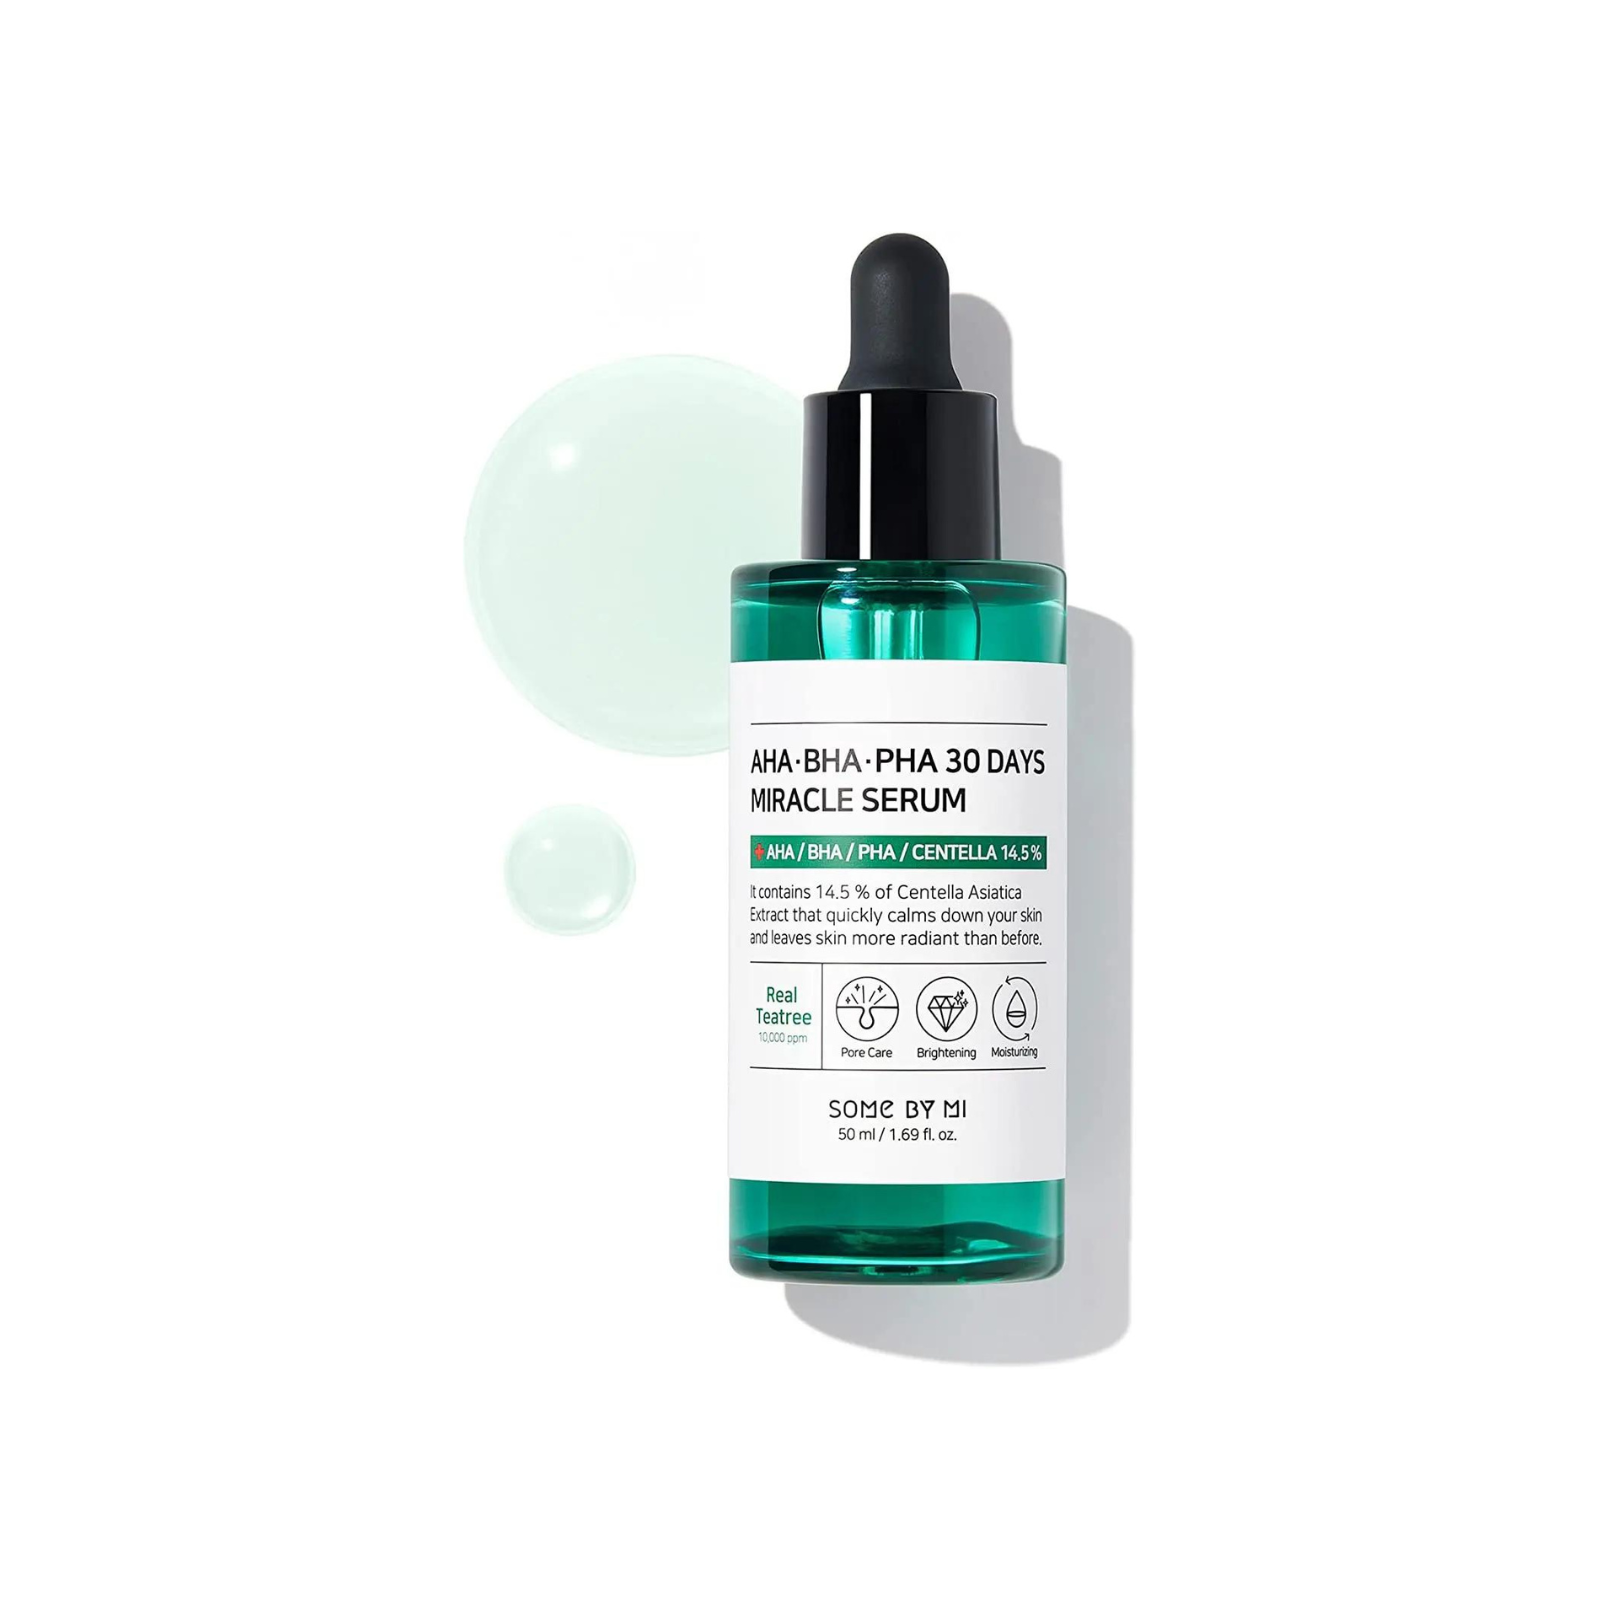 Serum for problem skin by Some By Mi (Some By Mi AHA/BHA/PHA 30 Days Miracle Serum)